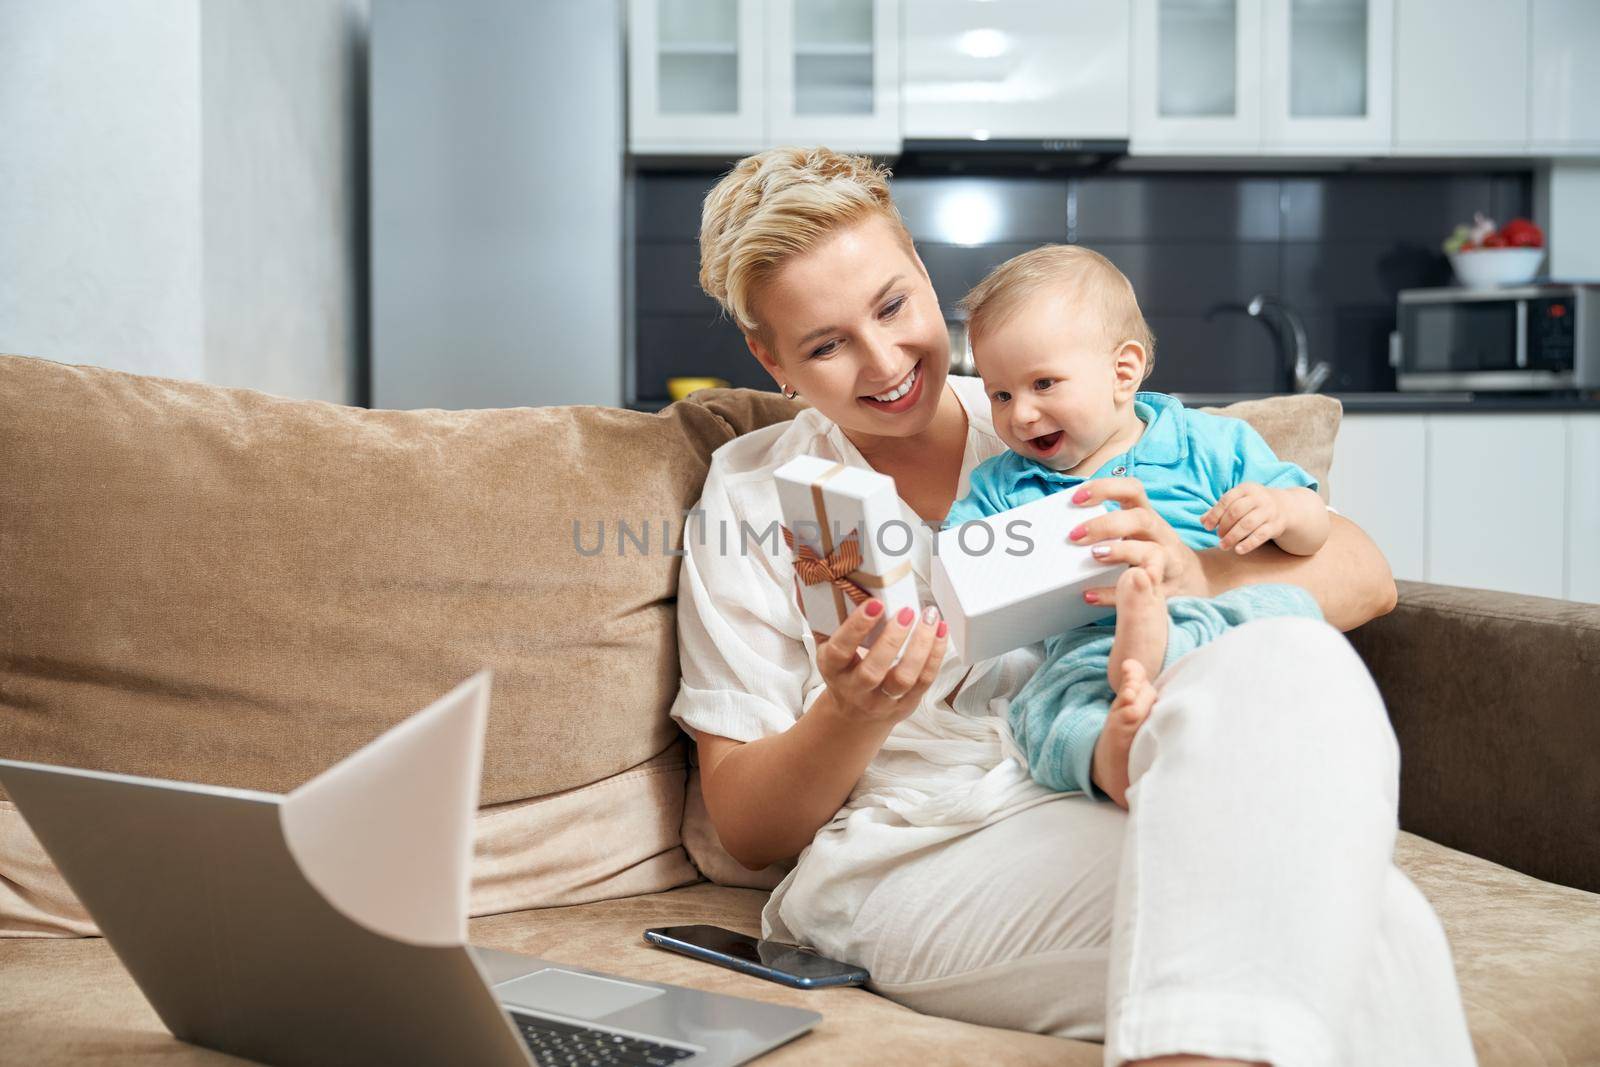 Woman with baby sitting on couch and opening present by SerhiiBobyk